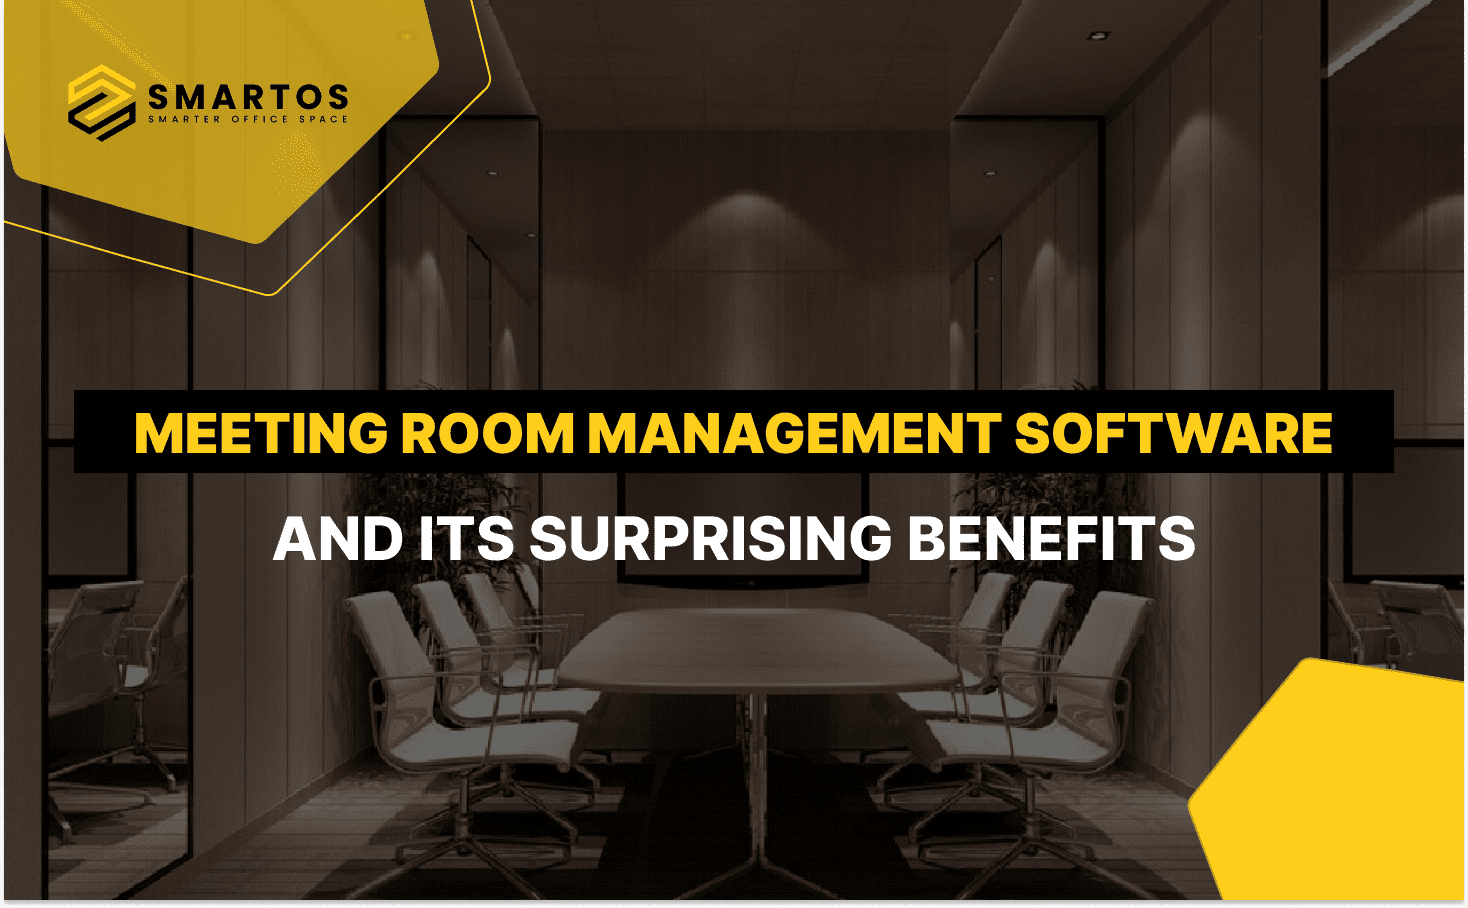 Meeting Room Management Software And Its Surprising Benefits